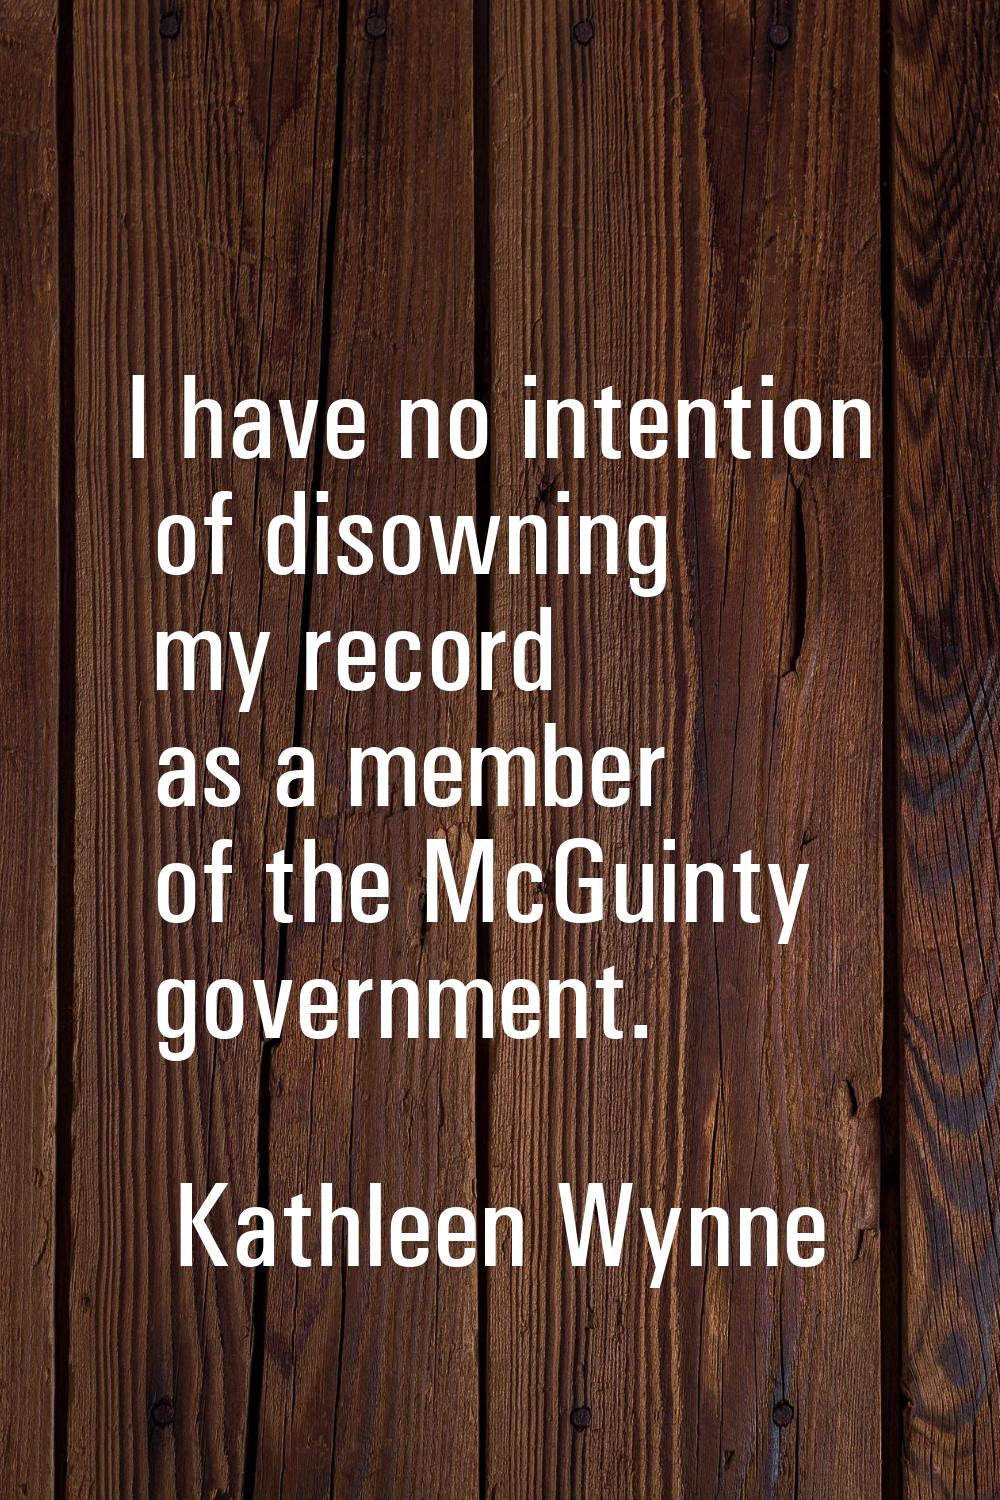 I have no intention of disowning my record as a member of the McGuinty government.